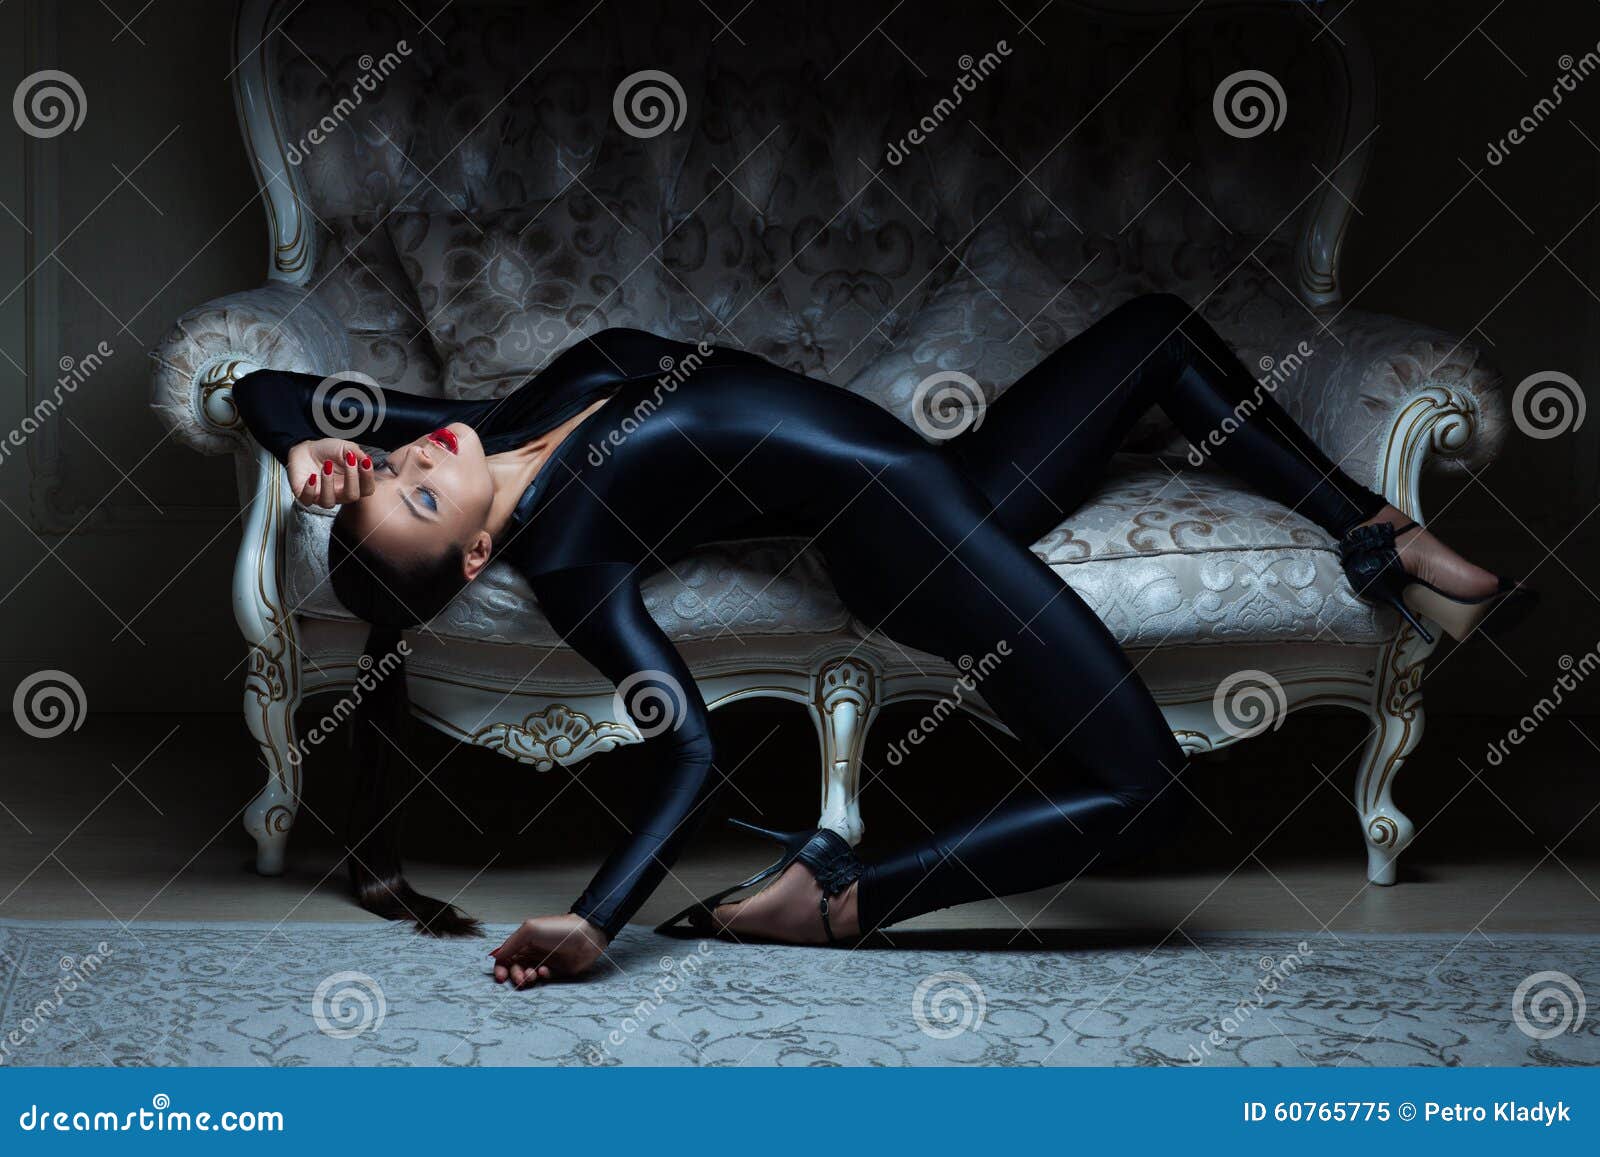 Girl Latex Suit Arched Her Back While Lying Sofa Stock Image Image